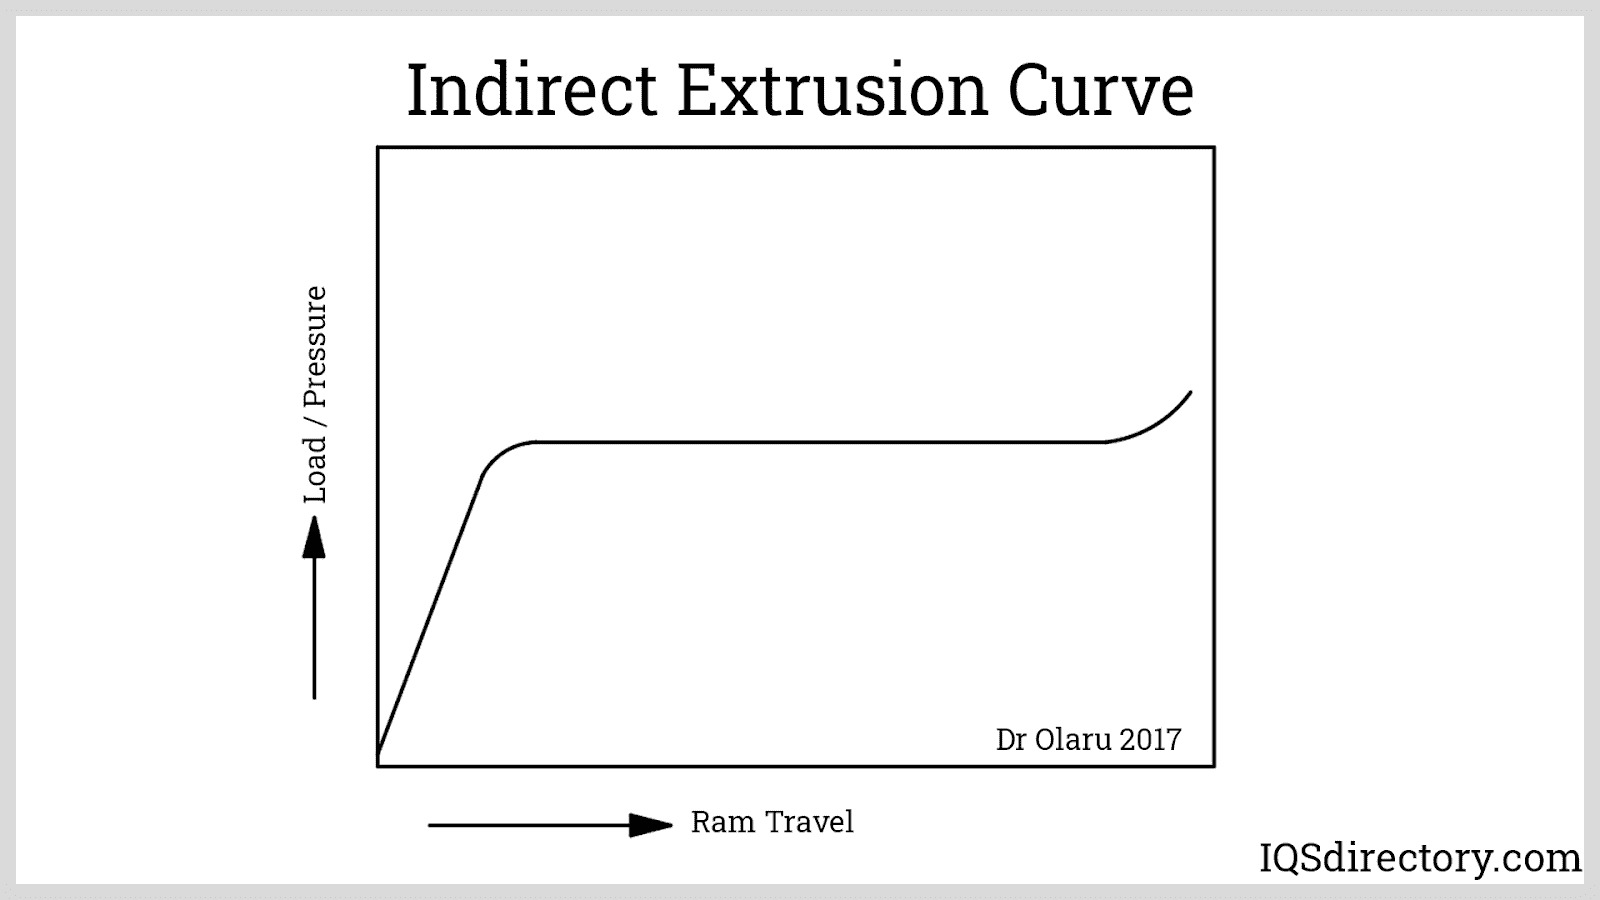 Indirect Extrusion Curve